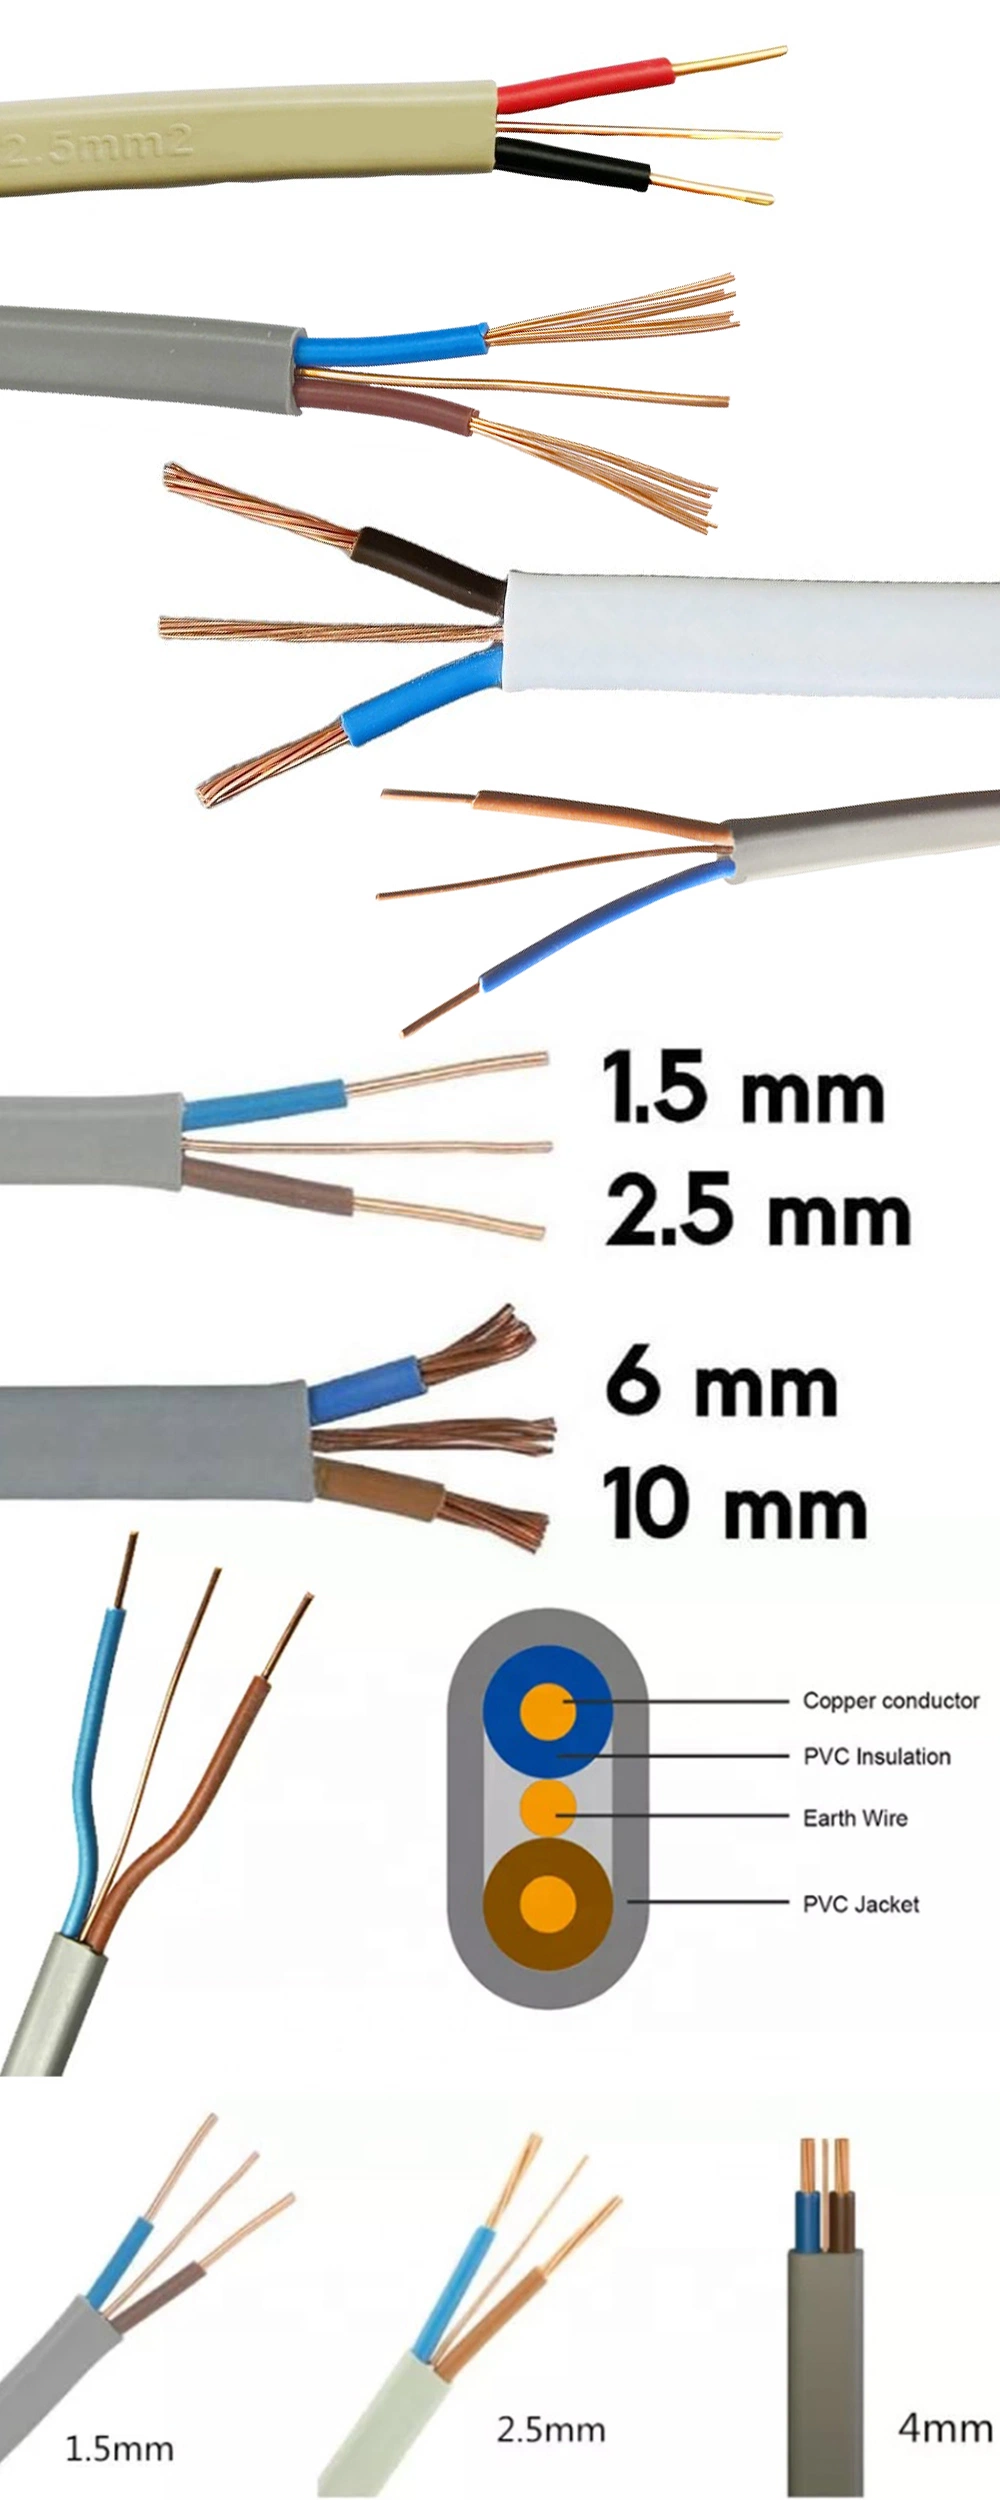 2X2.5mm2 Flat 2core and Eart Wire 2X4mm Electr Twin and Earth Cable